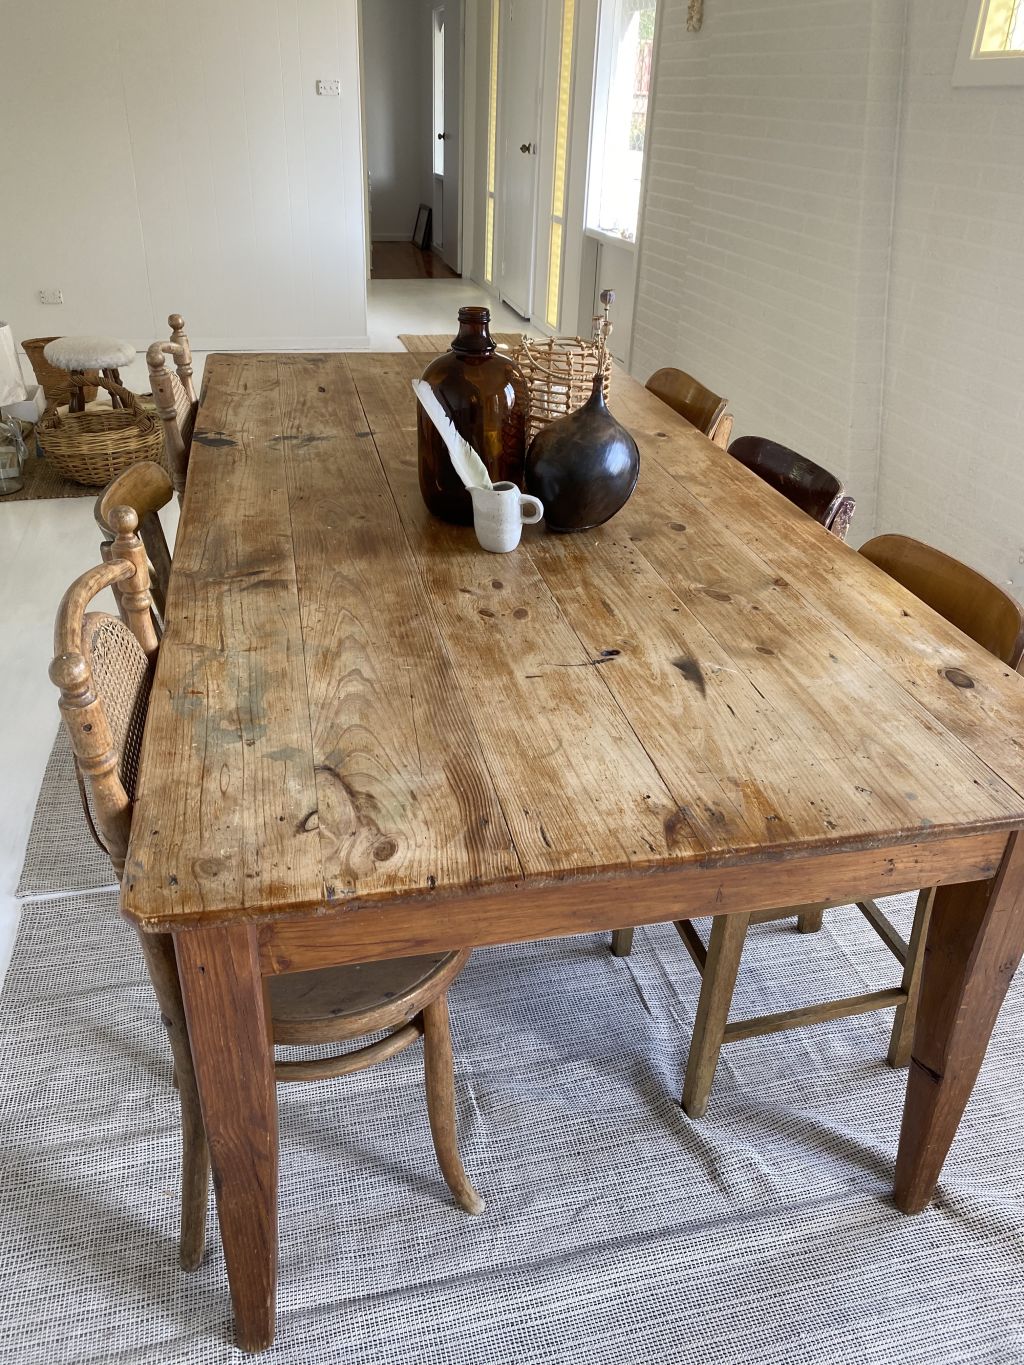 Meaningful pieces, including the dining table, furnish the house. Photo: Supplied